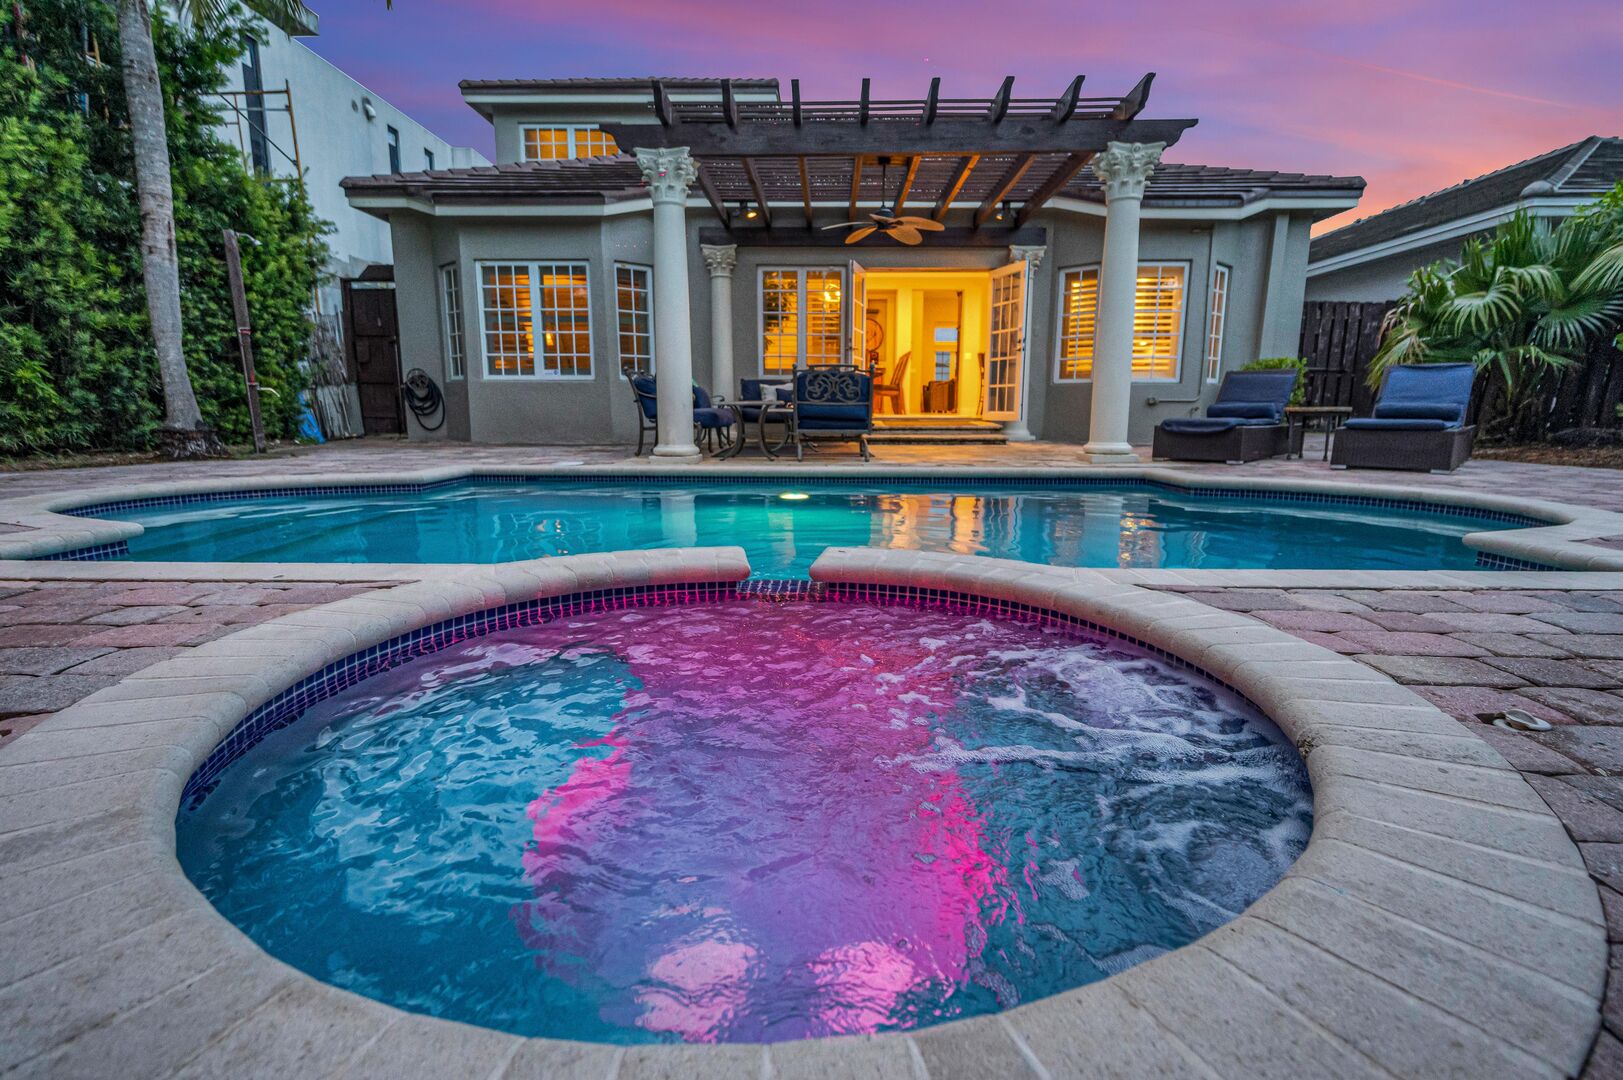 Enjoy the pool at night under the pink Florida sky.